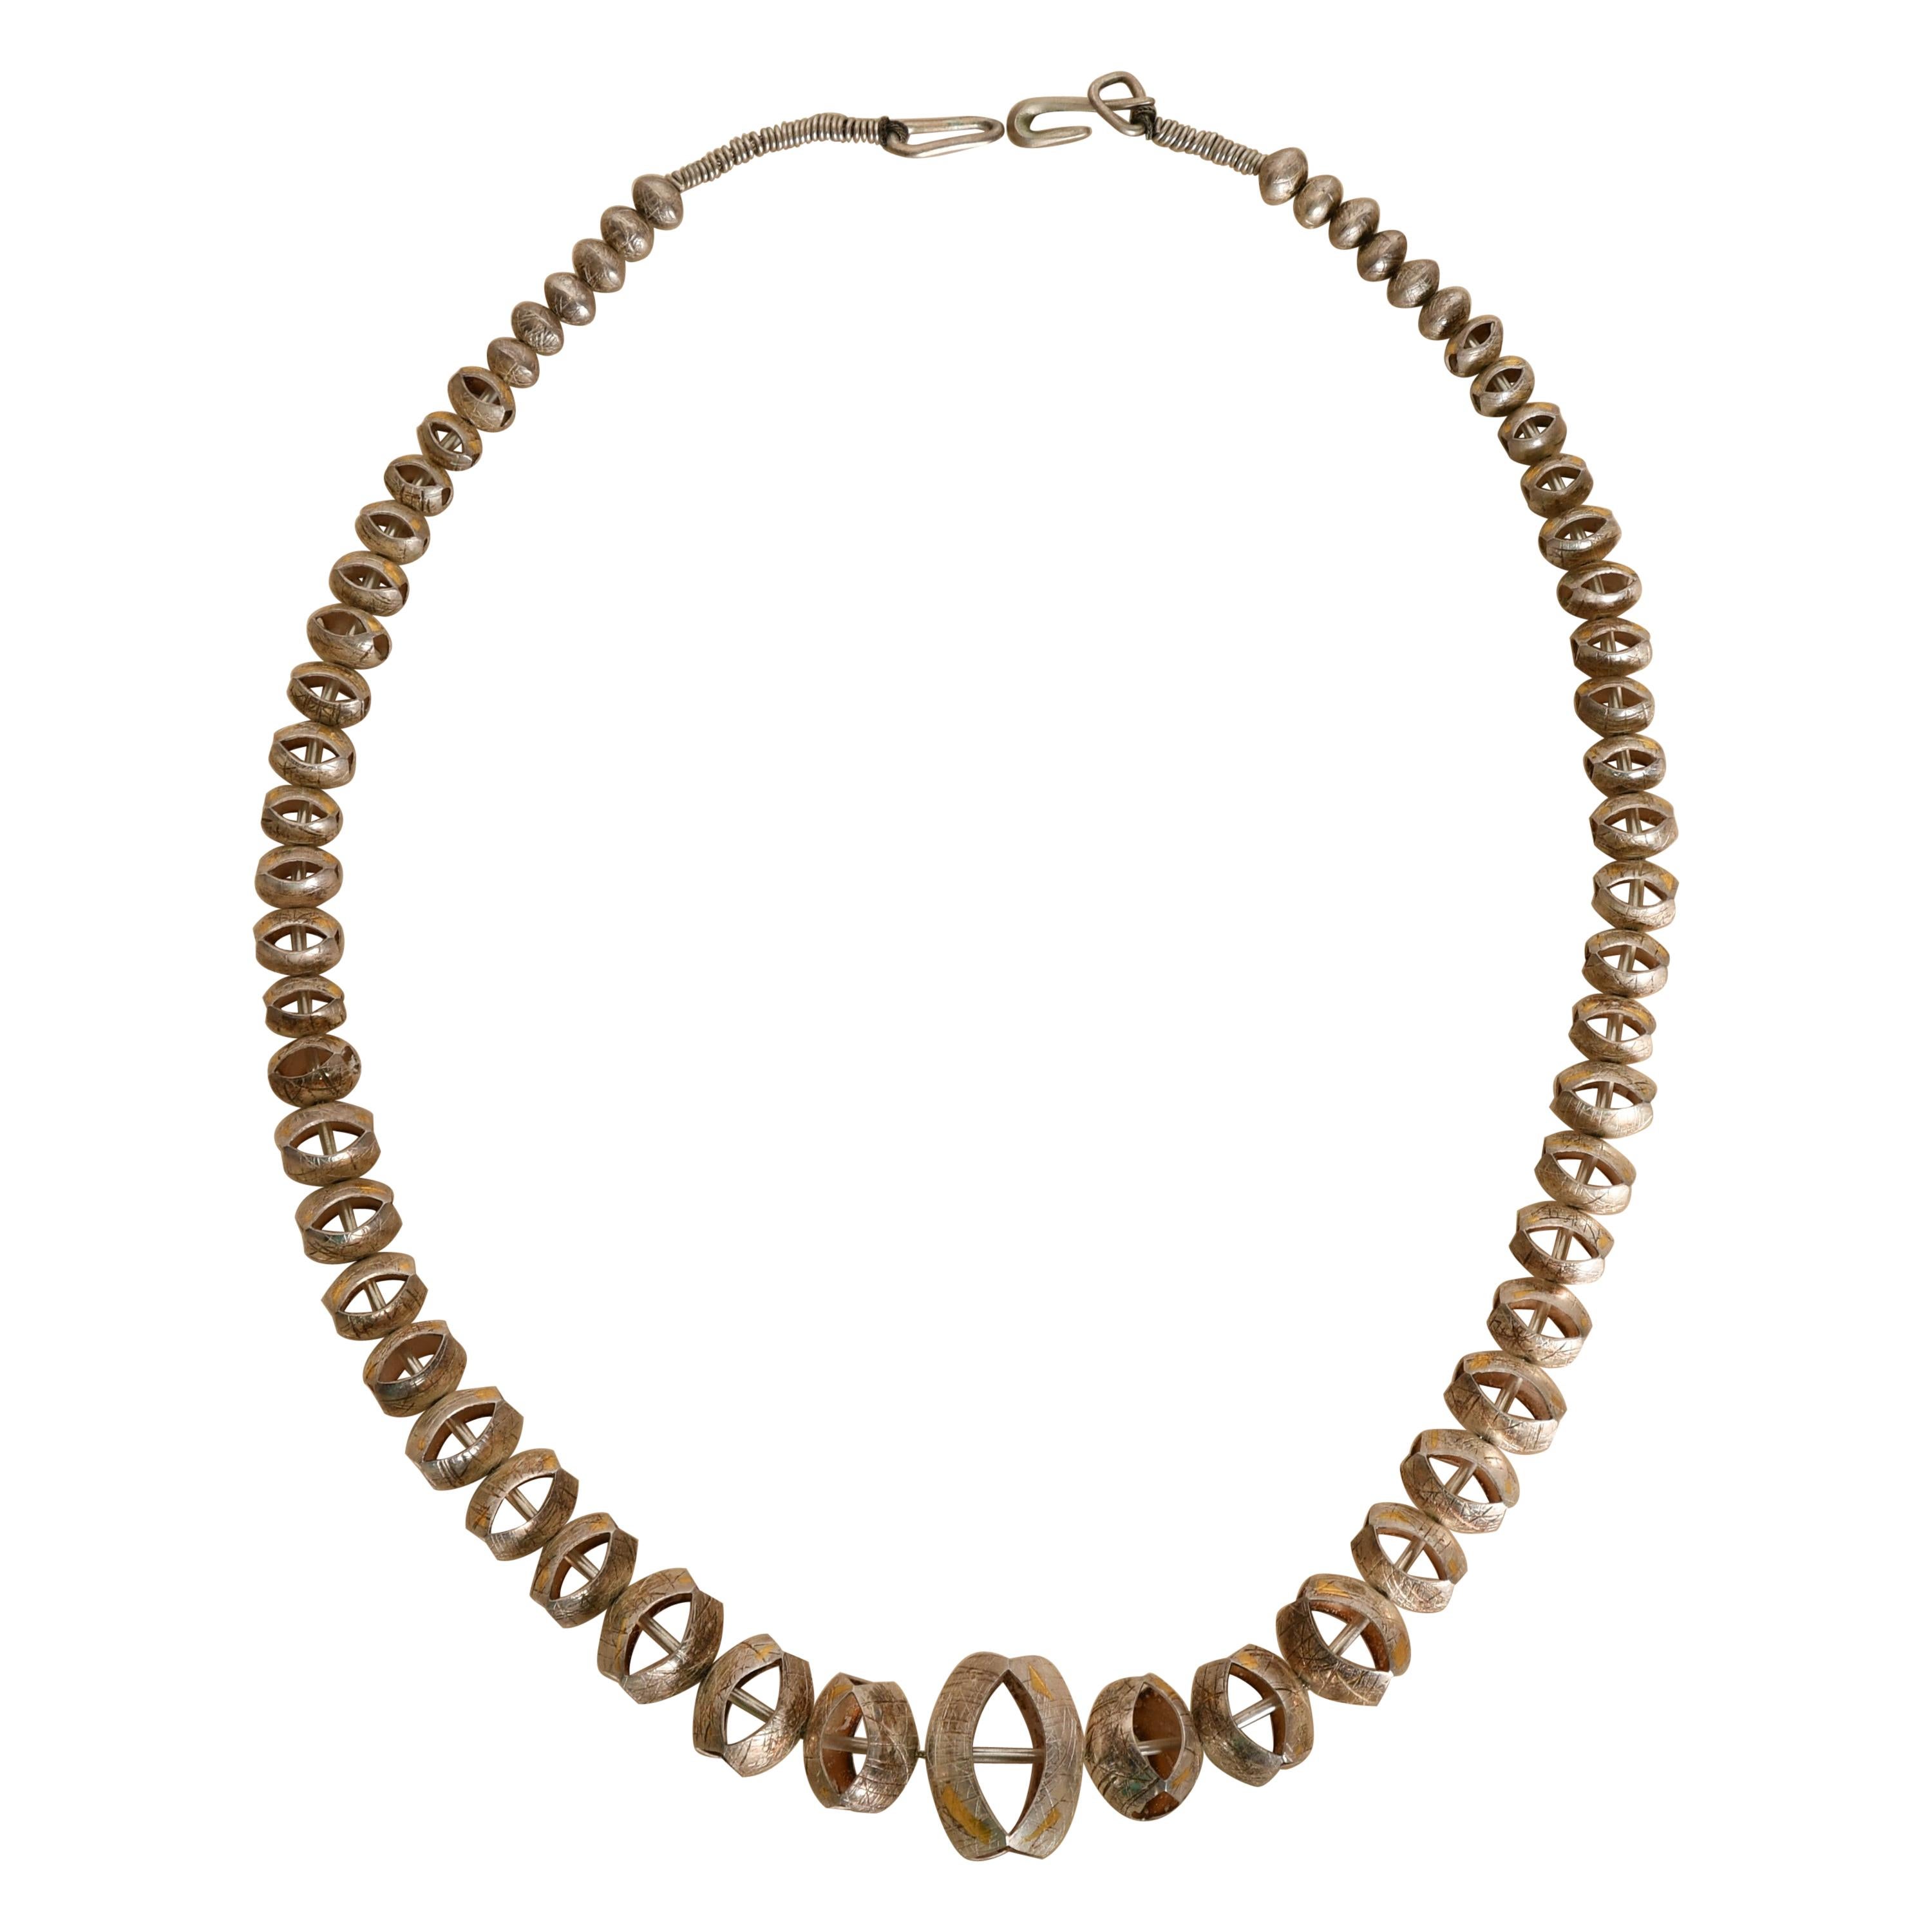 Cheyenne Harris Navajo Silver and Gold Necklace, 20th Century